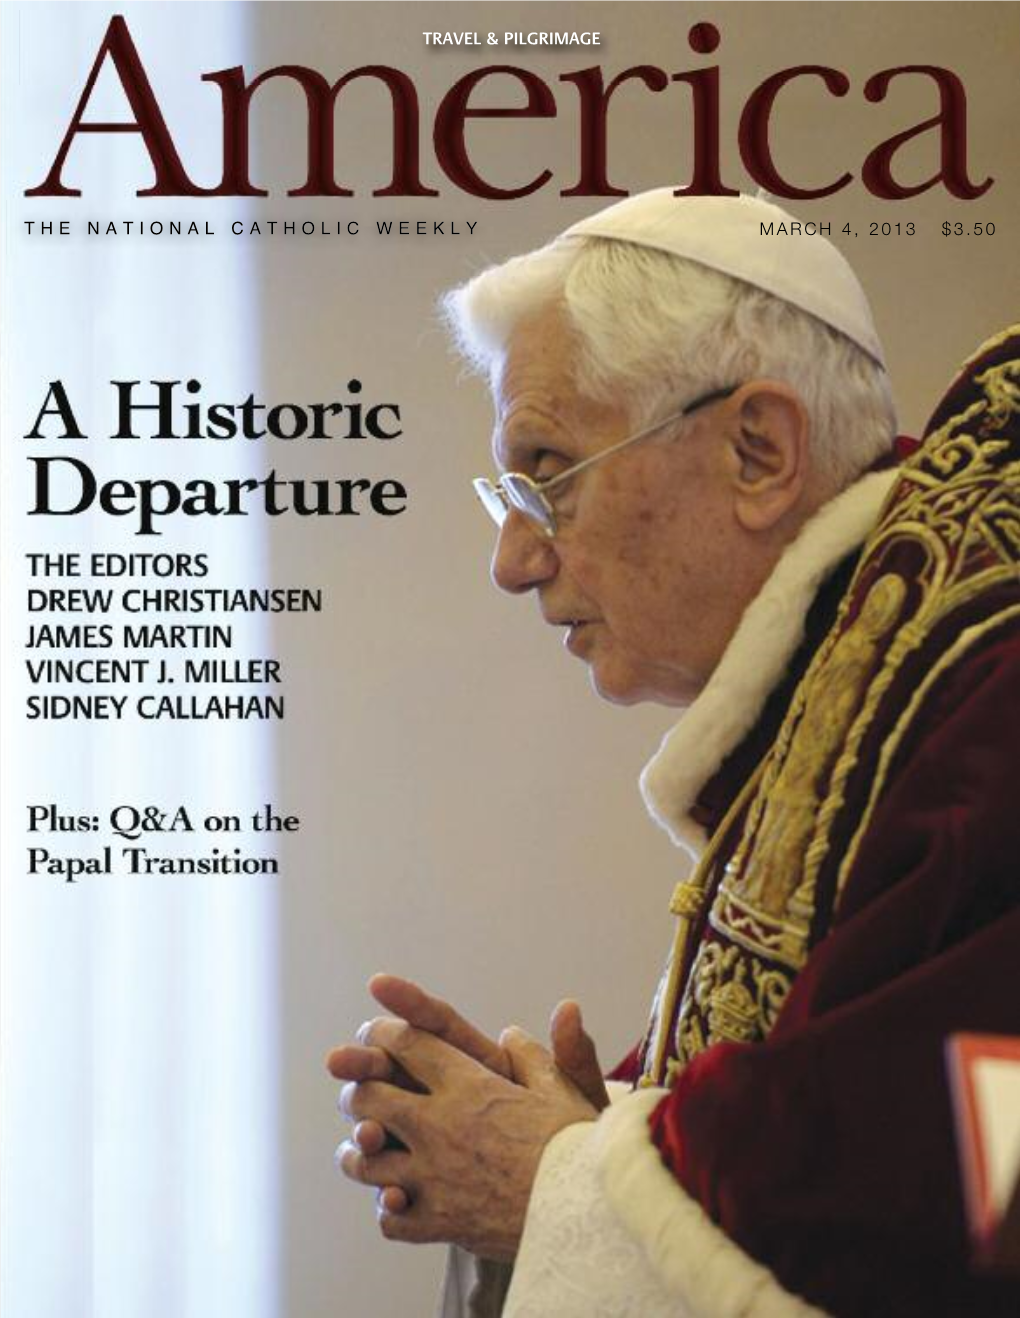 The National Catholic Weekly March 4, 2013 $3.50 Travel